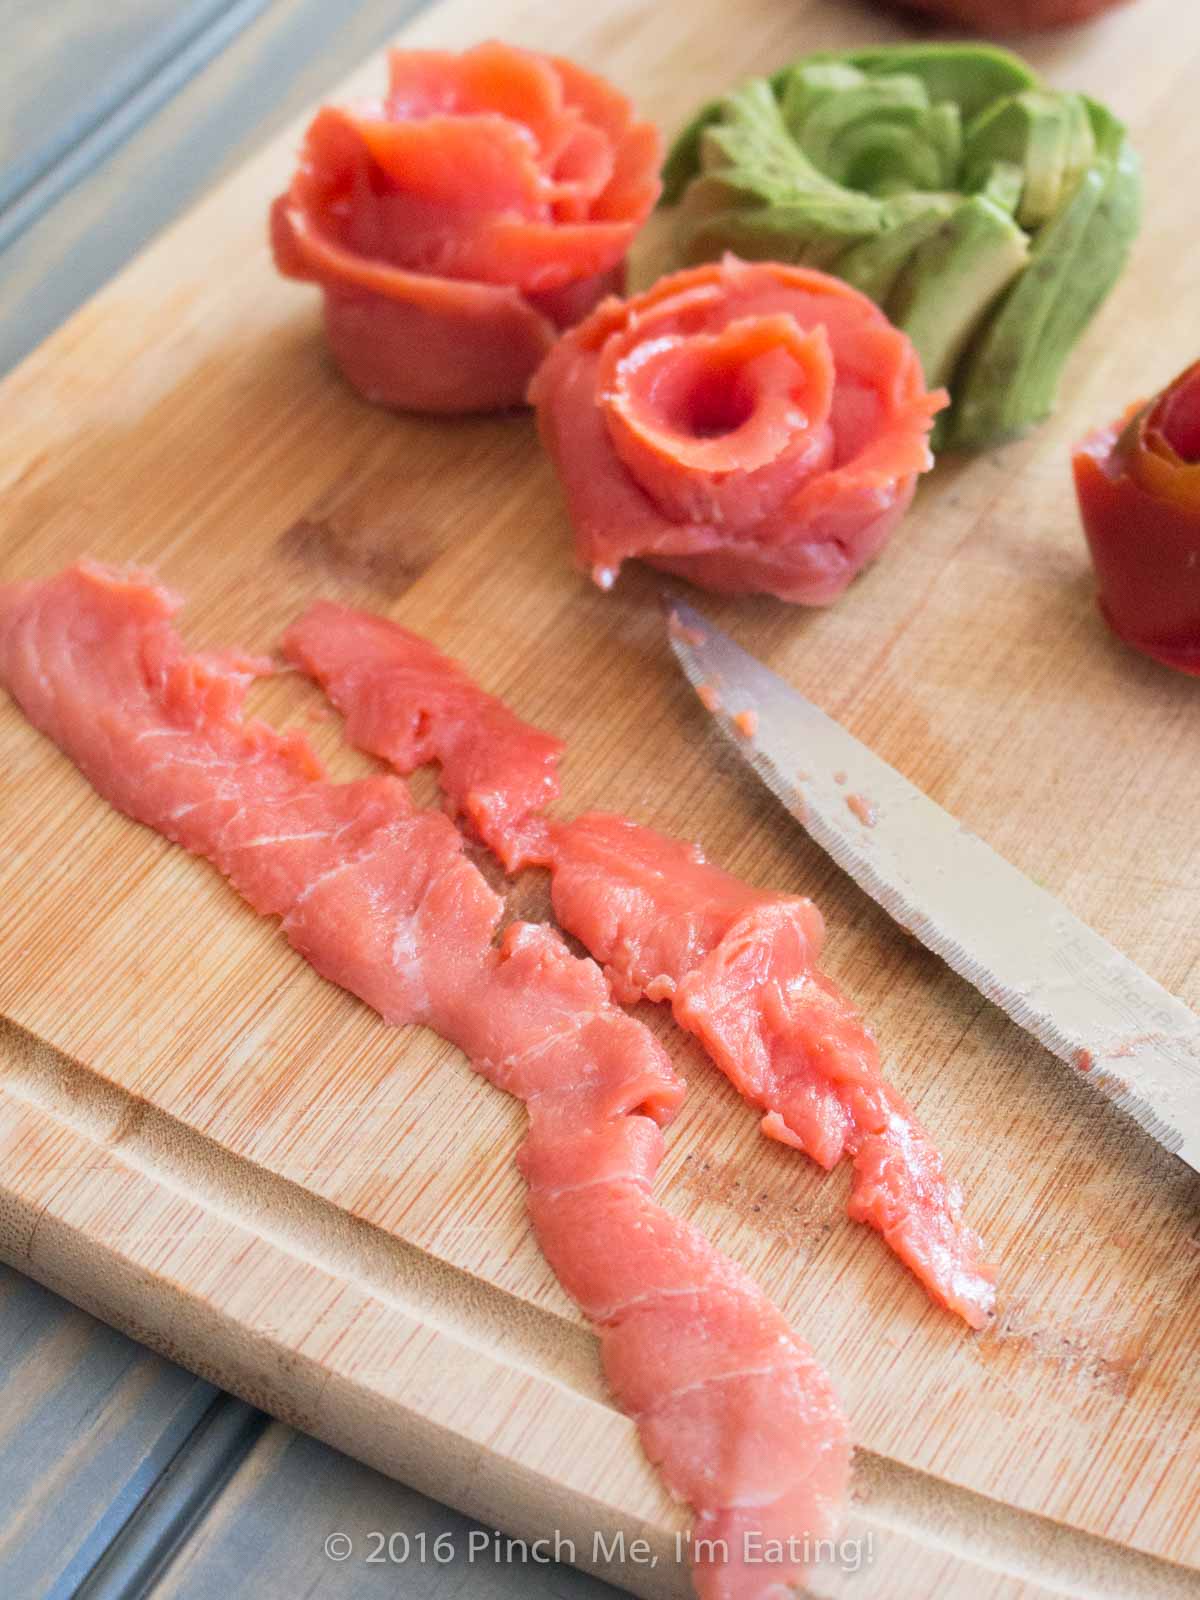 Smoked salmon strips on a wooden cutting board.